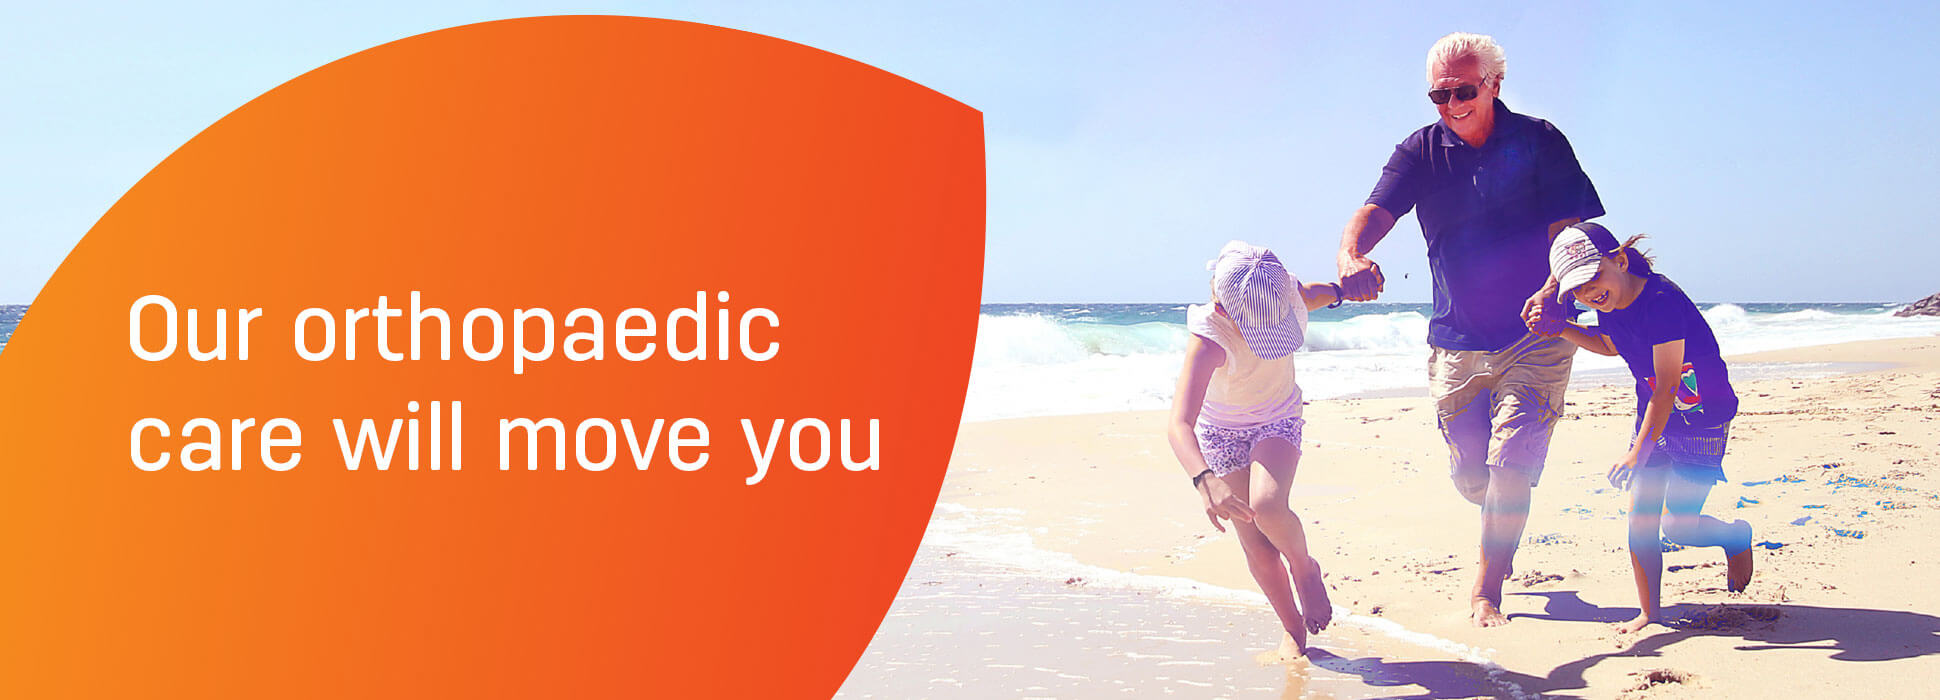 Our orthopaedic care will move you